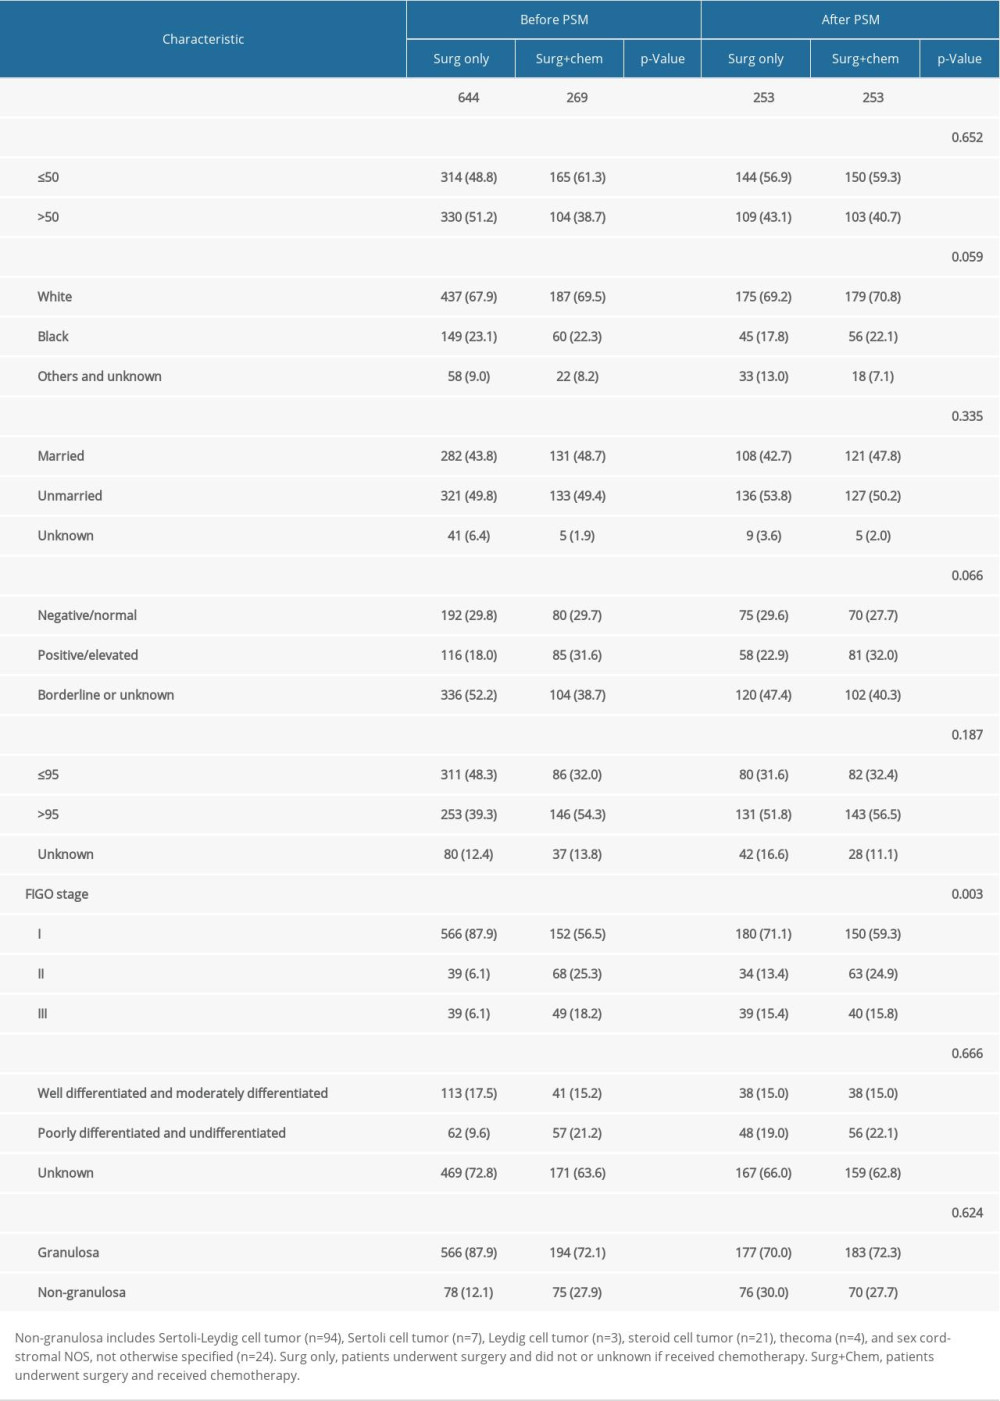 Correlations between chemotherapy and baseline characteristics of patients with sex cord-stromal tumors in the overall included population and propensity score-matched population.